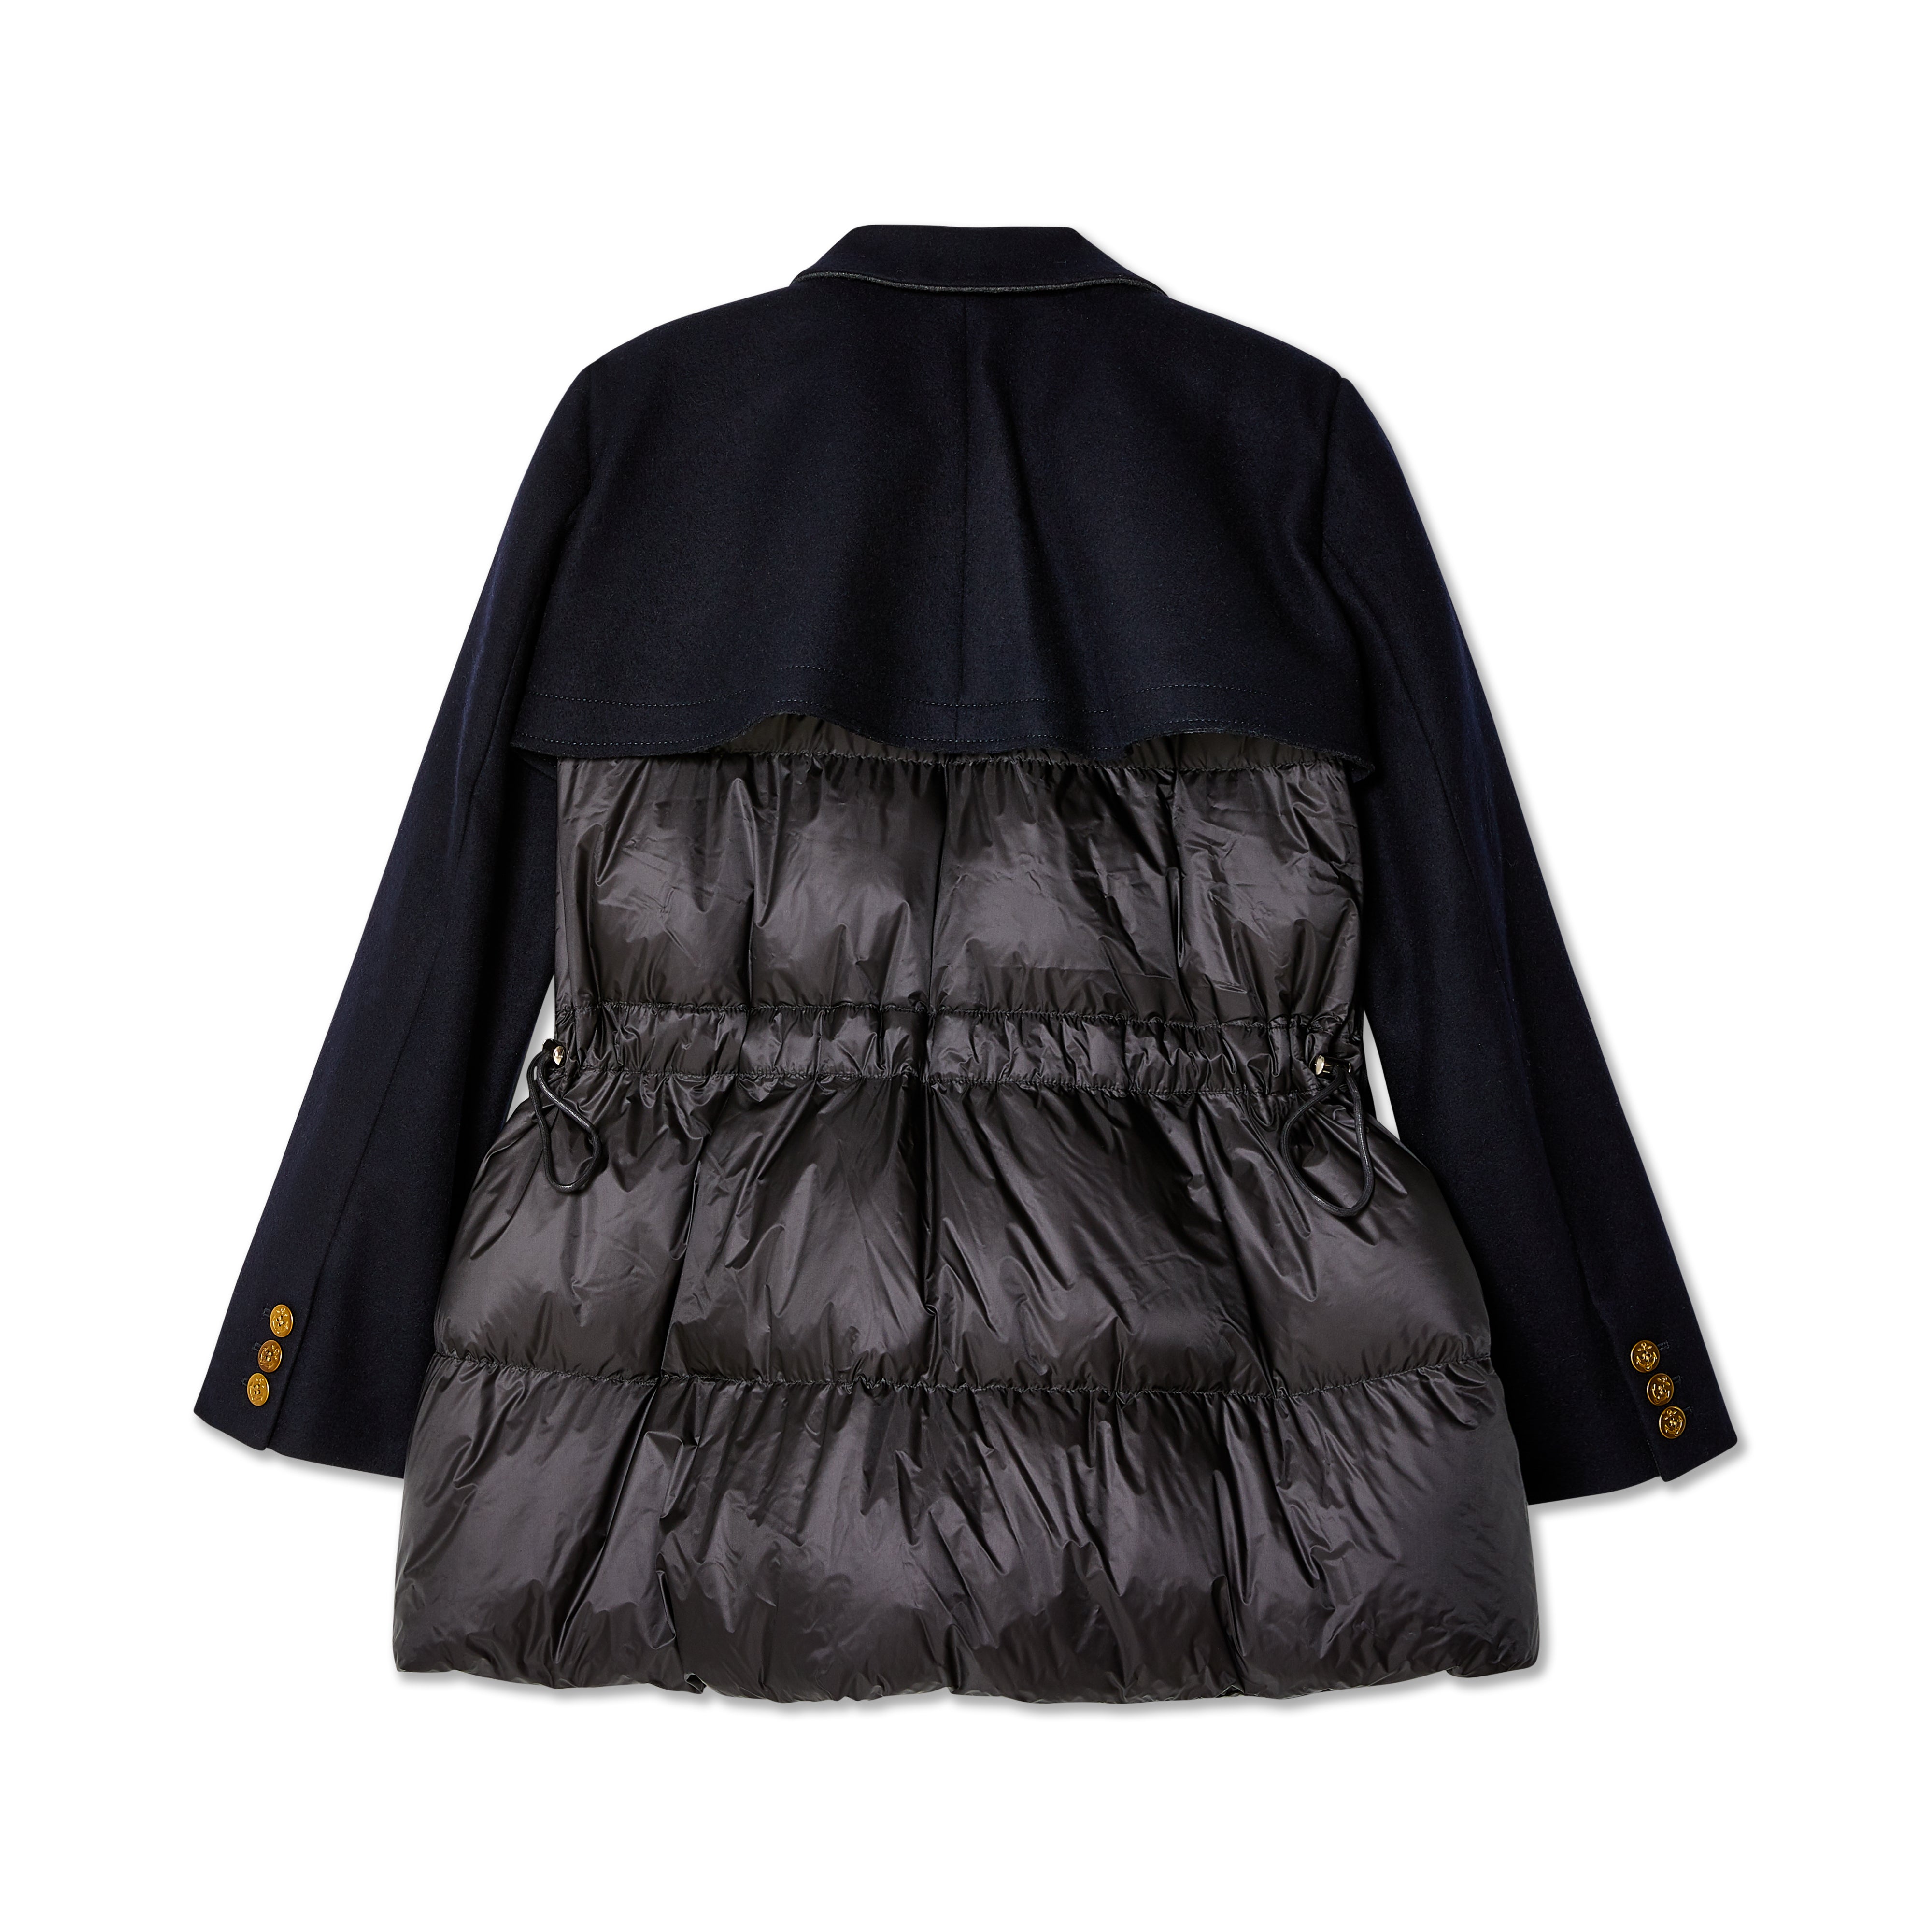 sacai - Women's Wool Padded Double Breasted Jacket - (Navy)